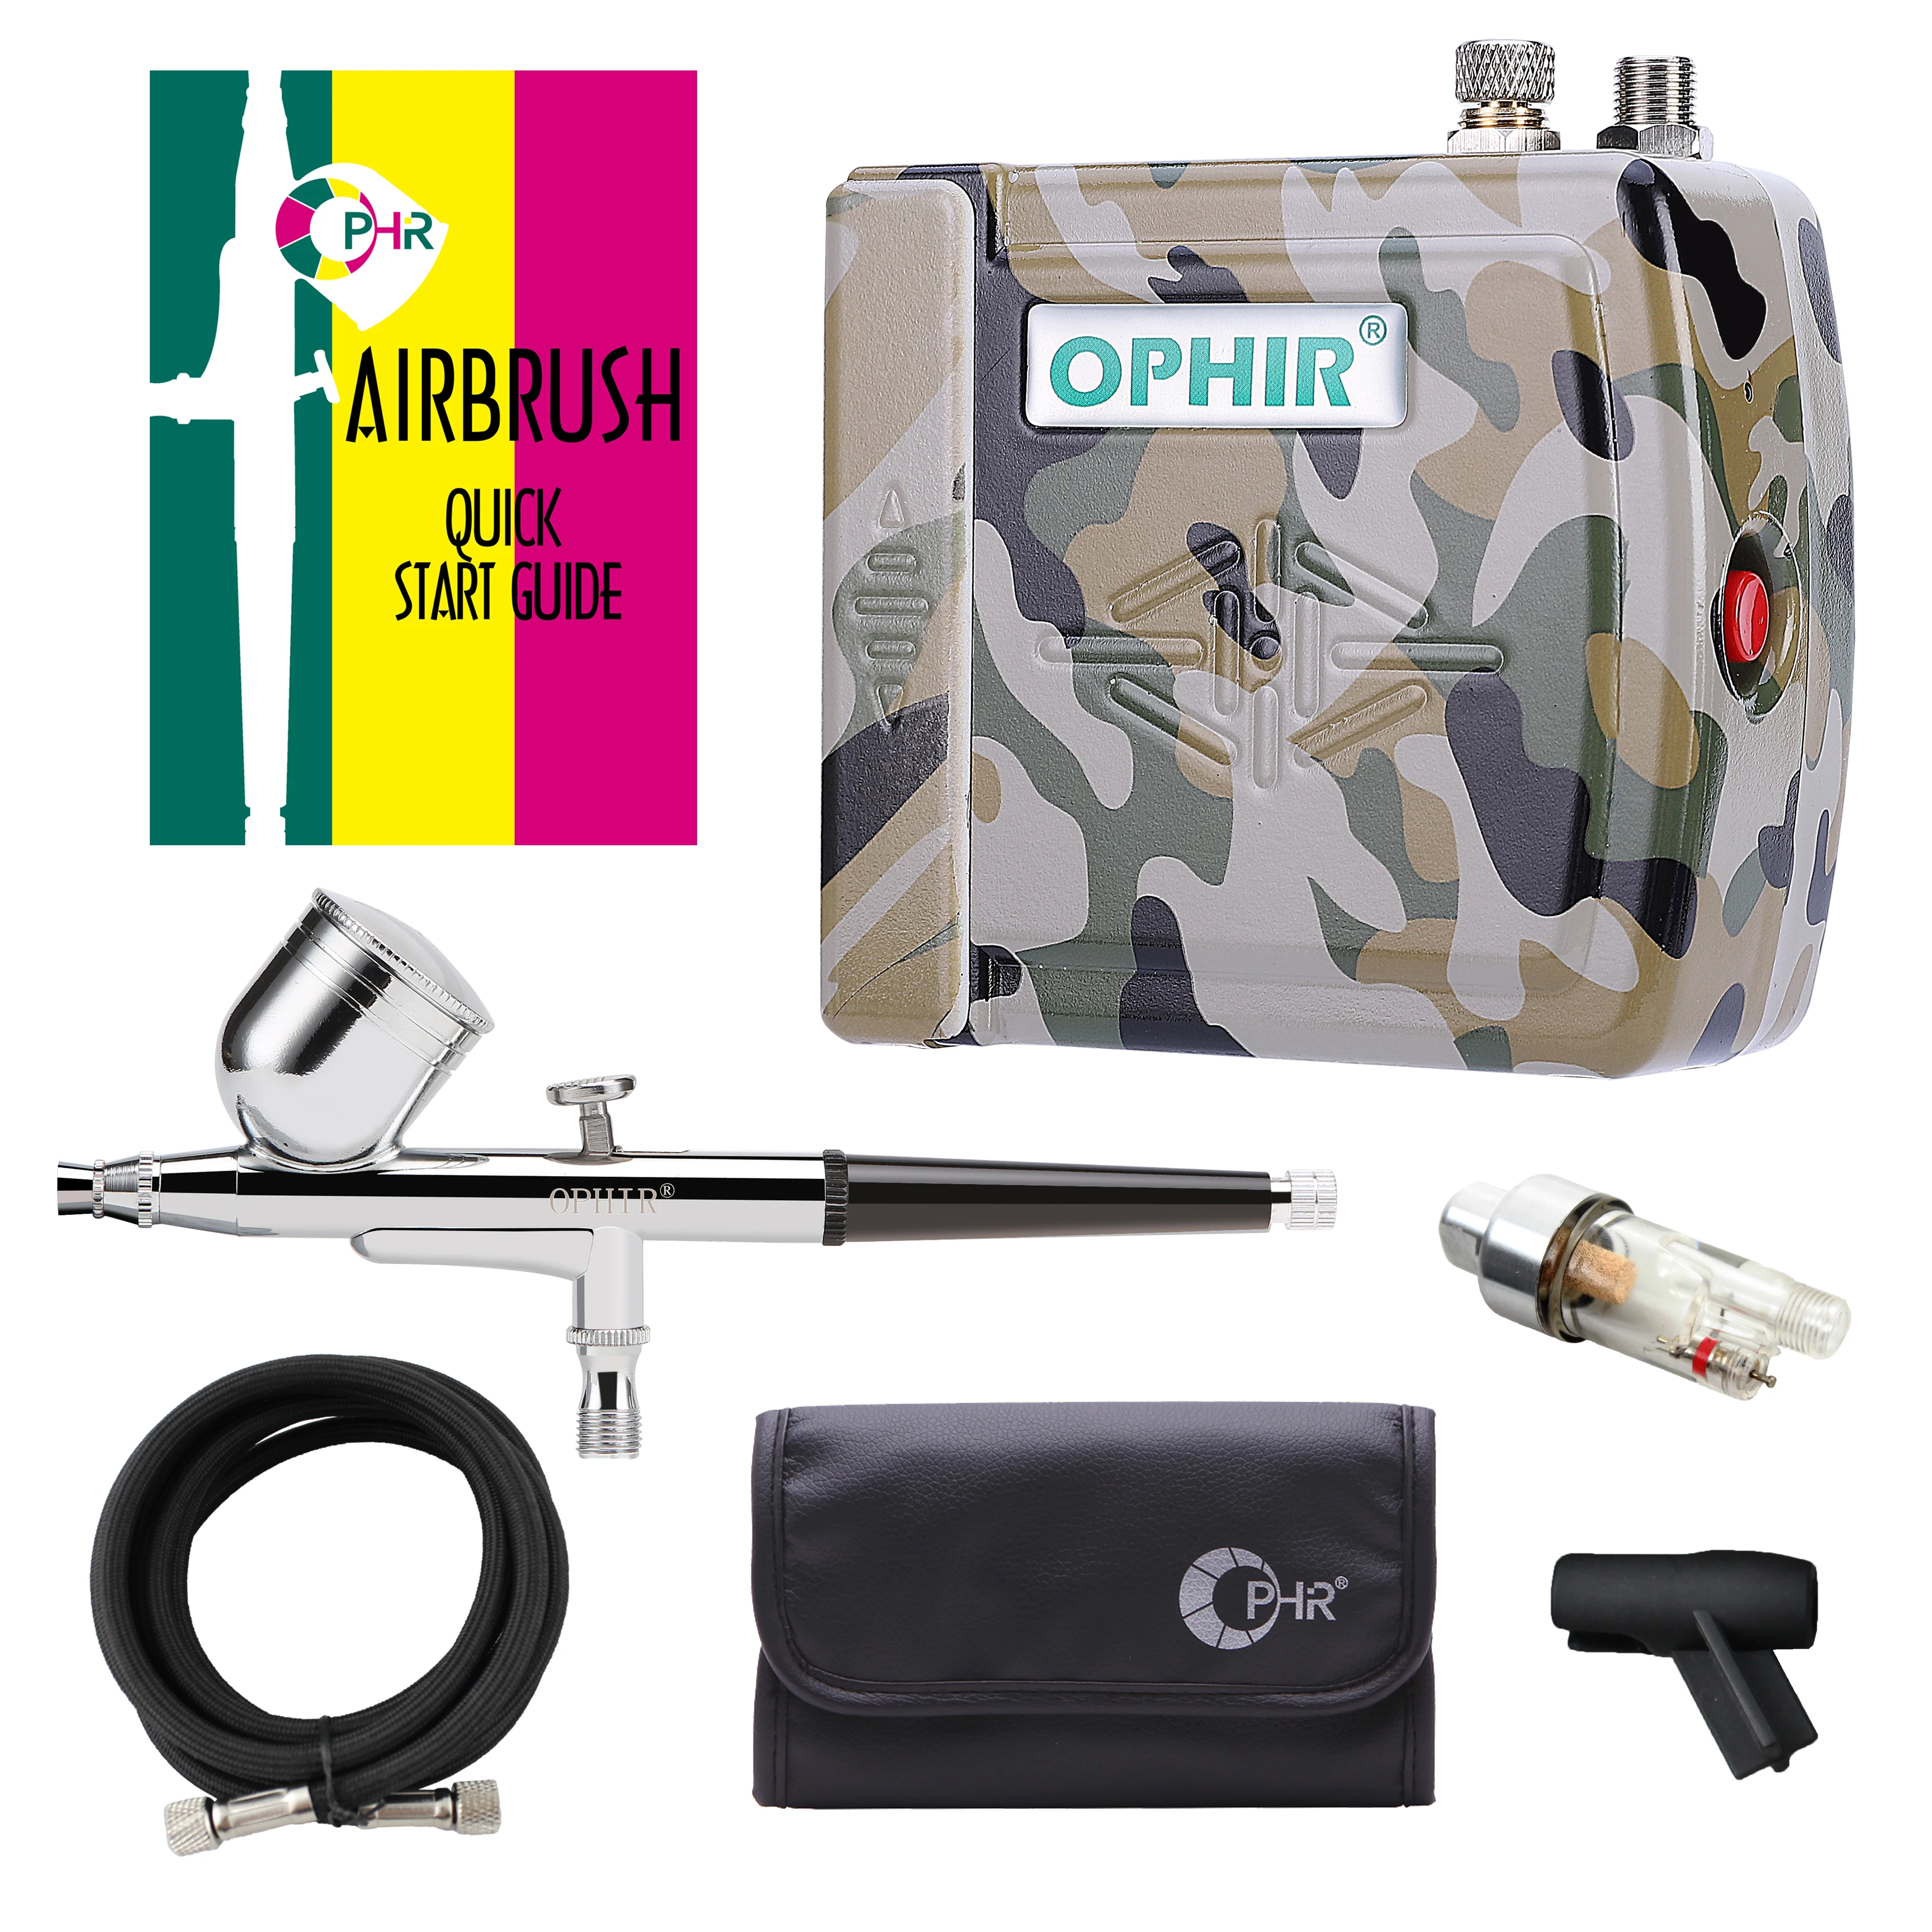 OPHIR Dual Action Airbrush Kit with Air Compressor Air Brush Spray Gun for Nail Art Hobby Makeup Body Paint